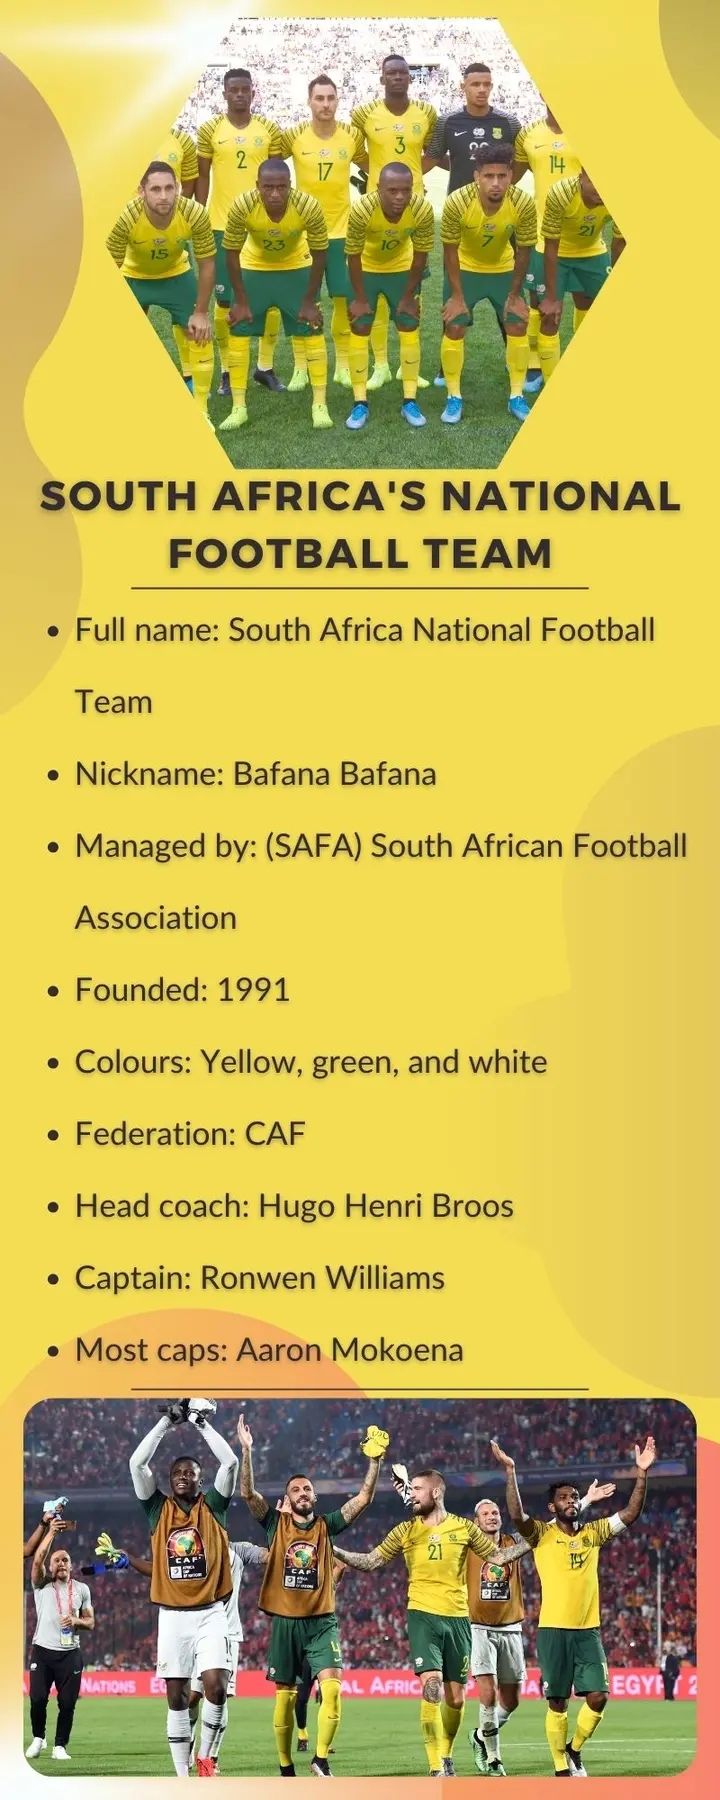 South Africa's national football team